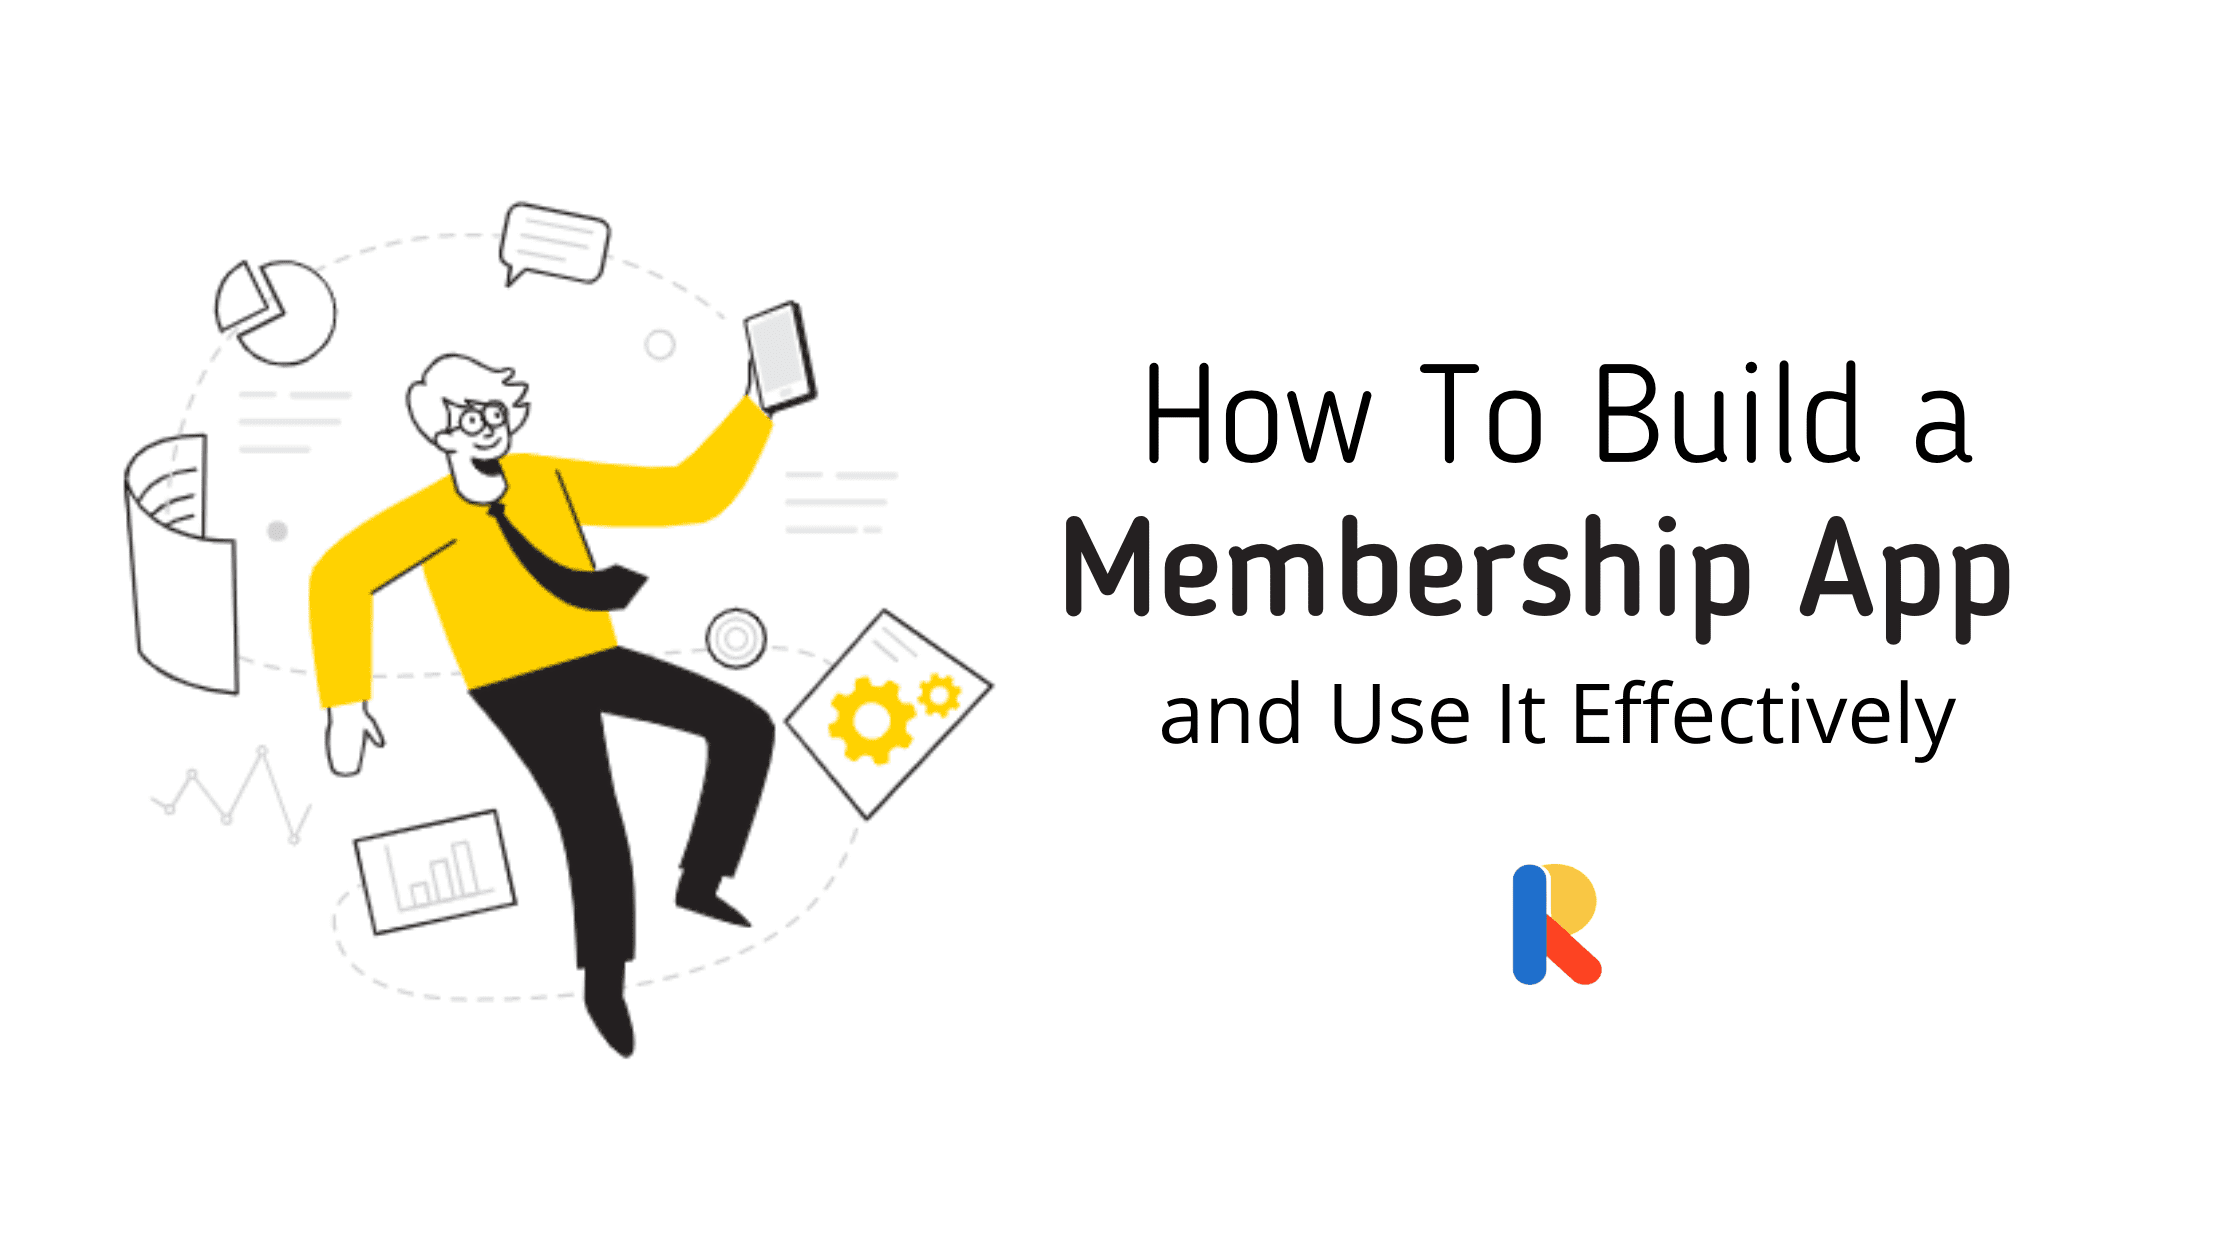 How to Build a Membership App and Use It Effectively